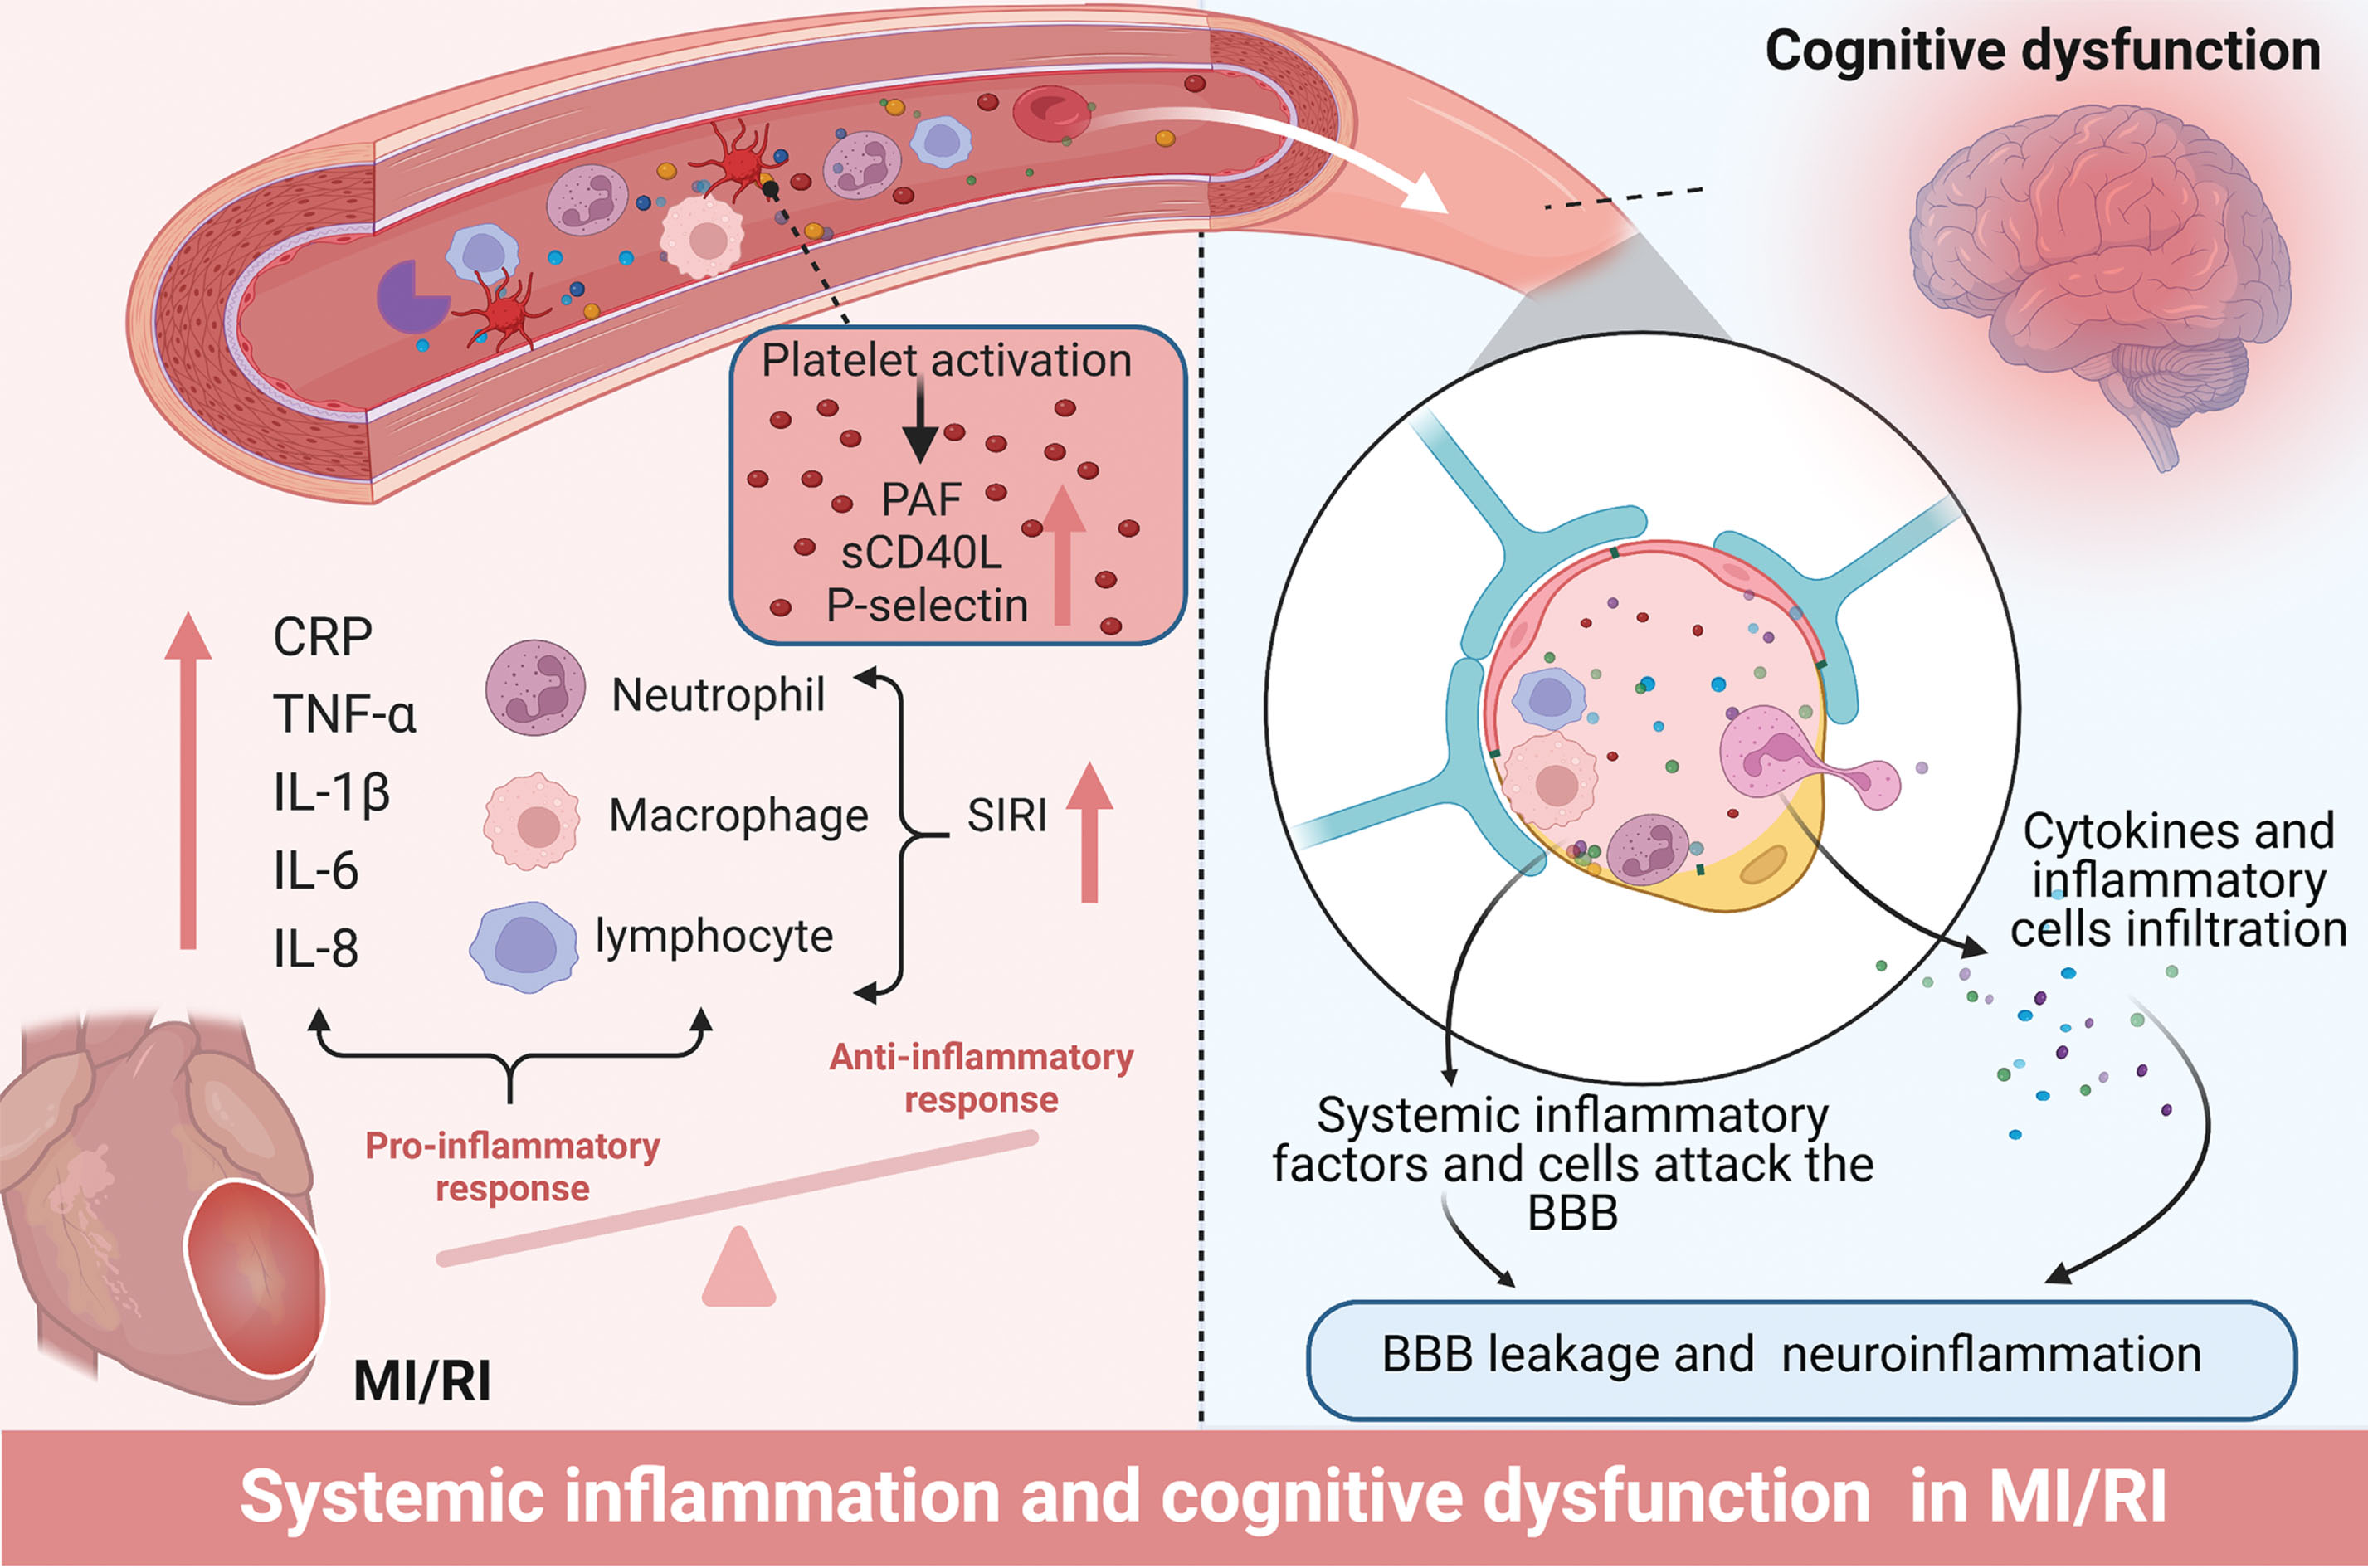 Systemic inflammation after MI/RI promotes neuroinflammation leading to cognitive decline. MI/RI activates systemic inflammation including an increase in inflammatory mediators (IL-1β, IL-6, IL-8, TNF-α, CRP), an increase in inflammatory cells manifested by SIRI, and the activation of platelets and induction of inflammatory substances released by platelets. These systemic inflammatory mediators g attack and enter the CNS via the BBB, leading to BBB leakage and neuroinflammation. BBB, blood-brain barrier; CNS, central nervous system; CRP, C-reactive protein; IL-1β, Interleukin 1 beta; IL-6, Interleukin 6; IL-8, Interleukin 8; SIRI, Systemic inflammation response index; TNF-α, Tumor necrosis factor-alpha.